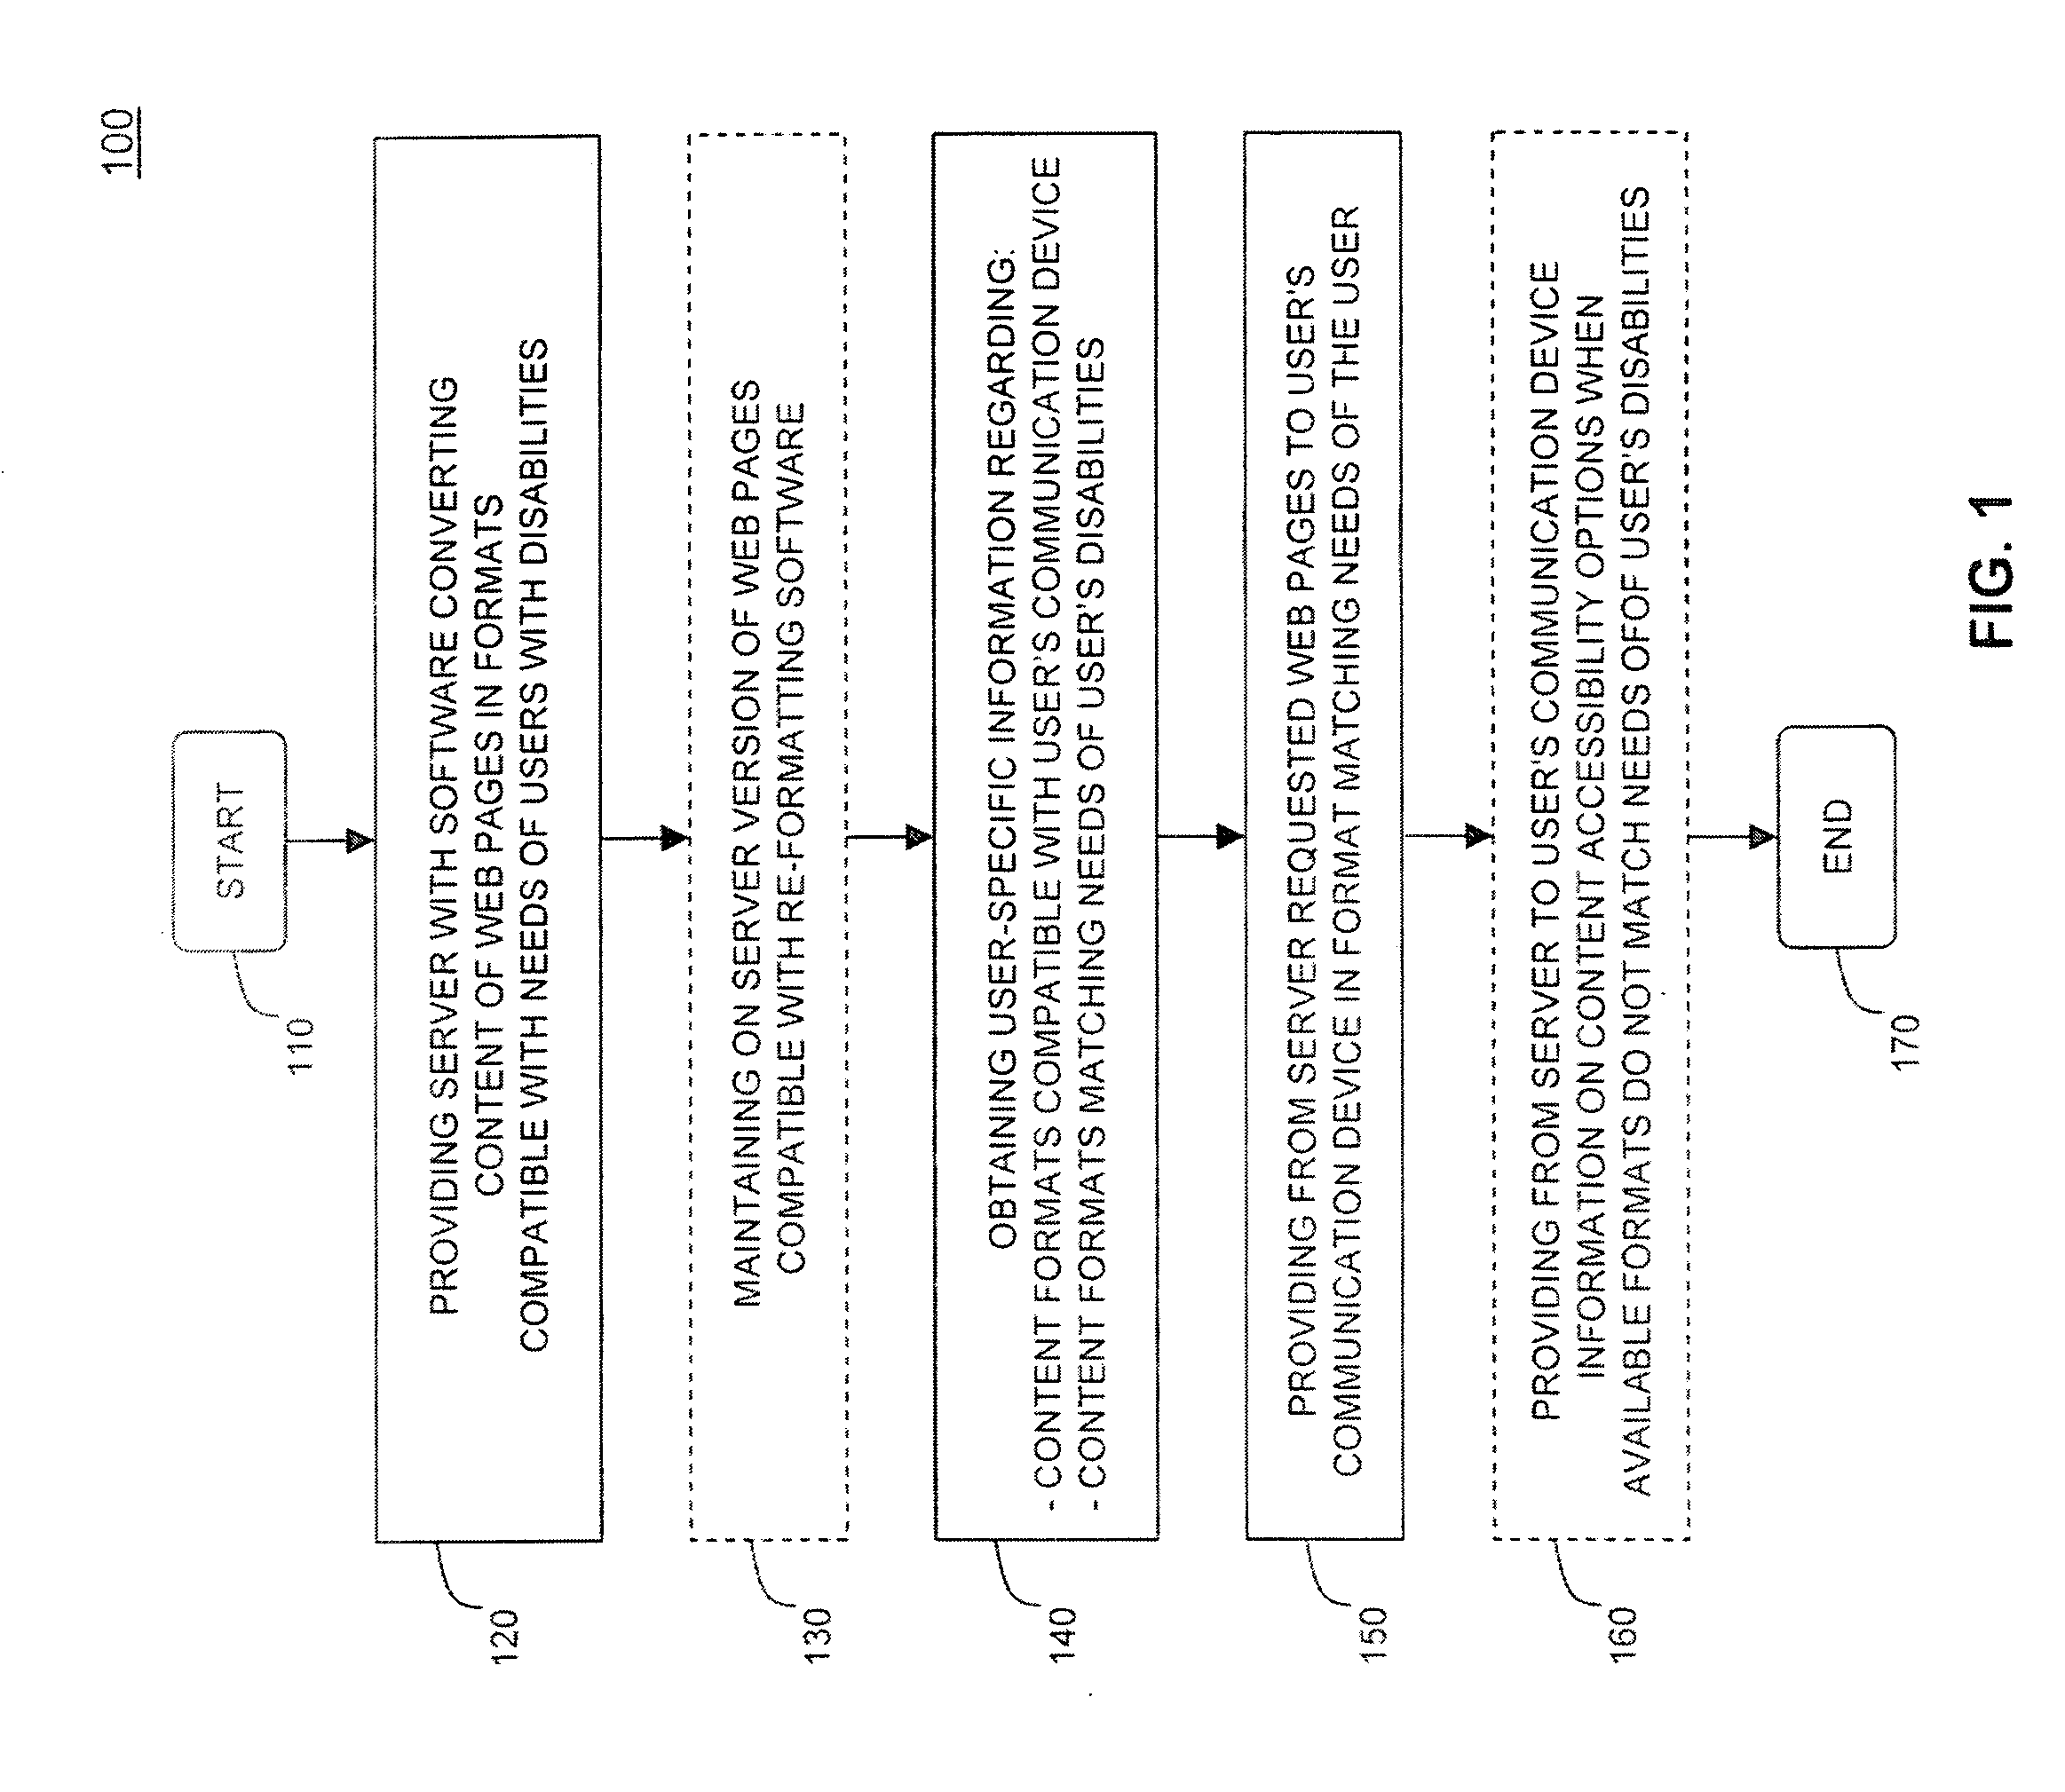 Server-based method for providing internet content to users with disabilities